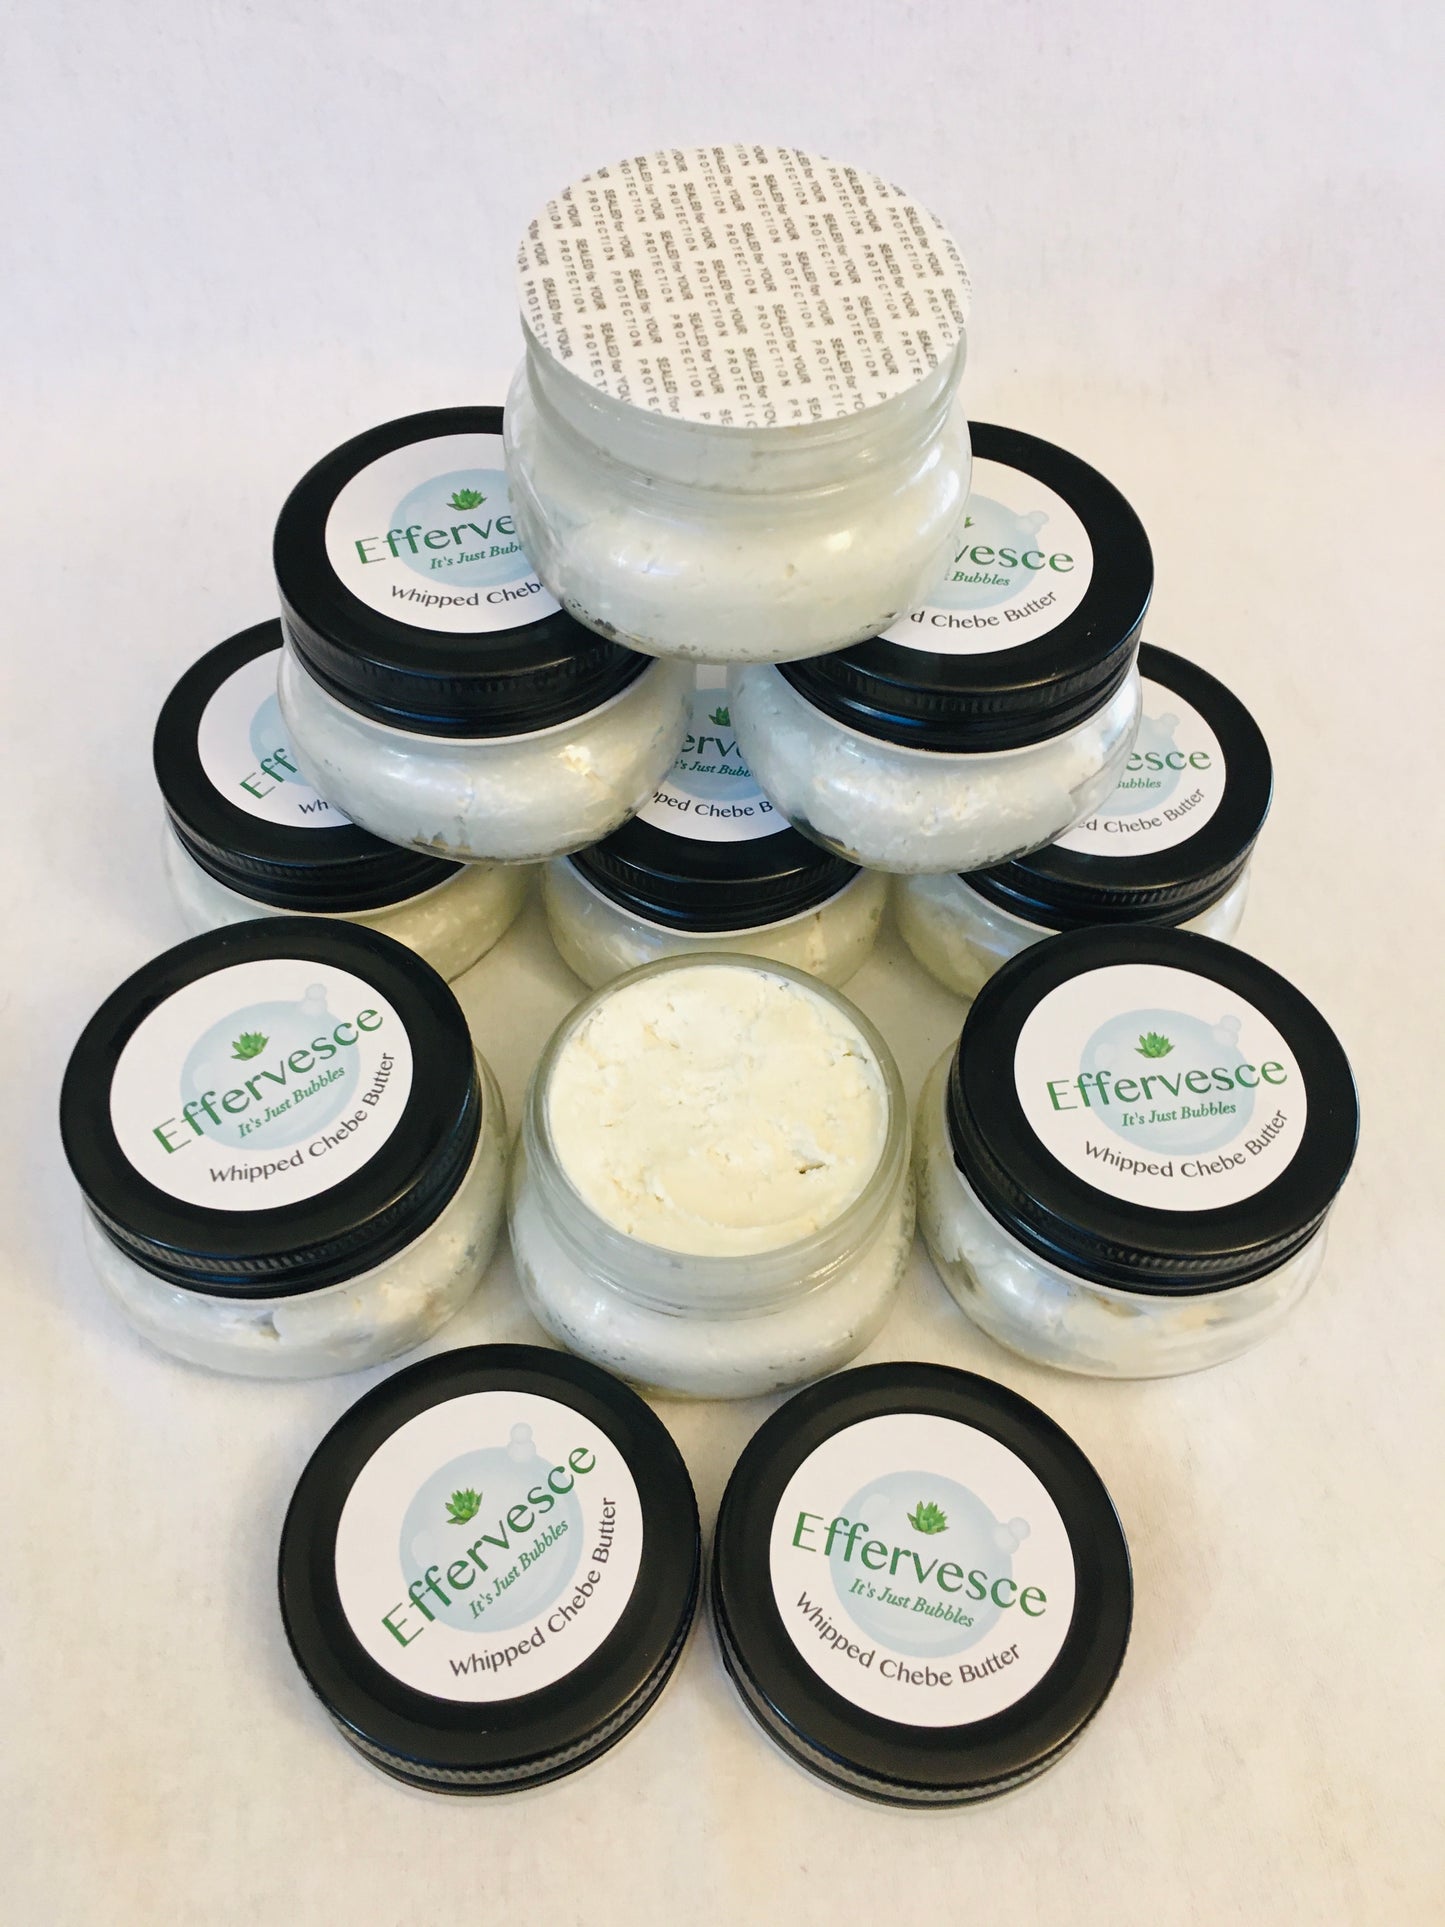 Whipped Chebe Butter for Hair - Strengthen and Grow, Effervesce.ItsJustBubbles, Whipped Butter, whipped-chebe-butter-for-hair-strengthen-and-grow, avocado oil, beeswax, butter, castor, chebe 